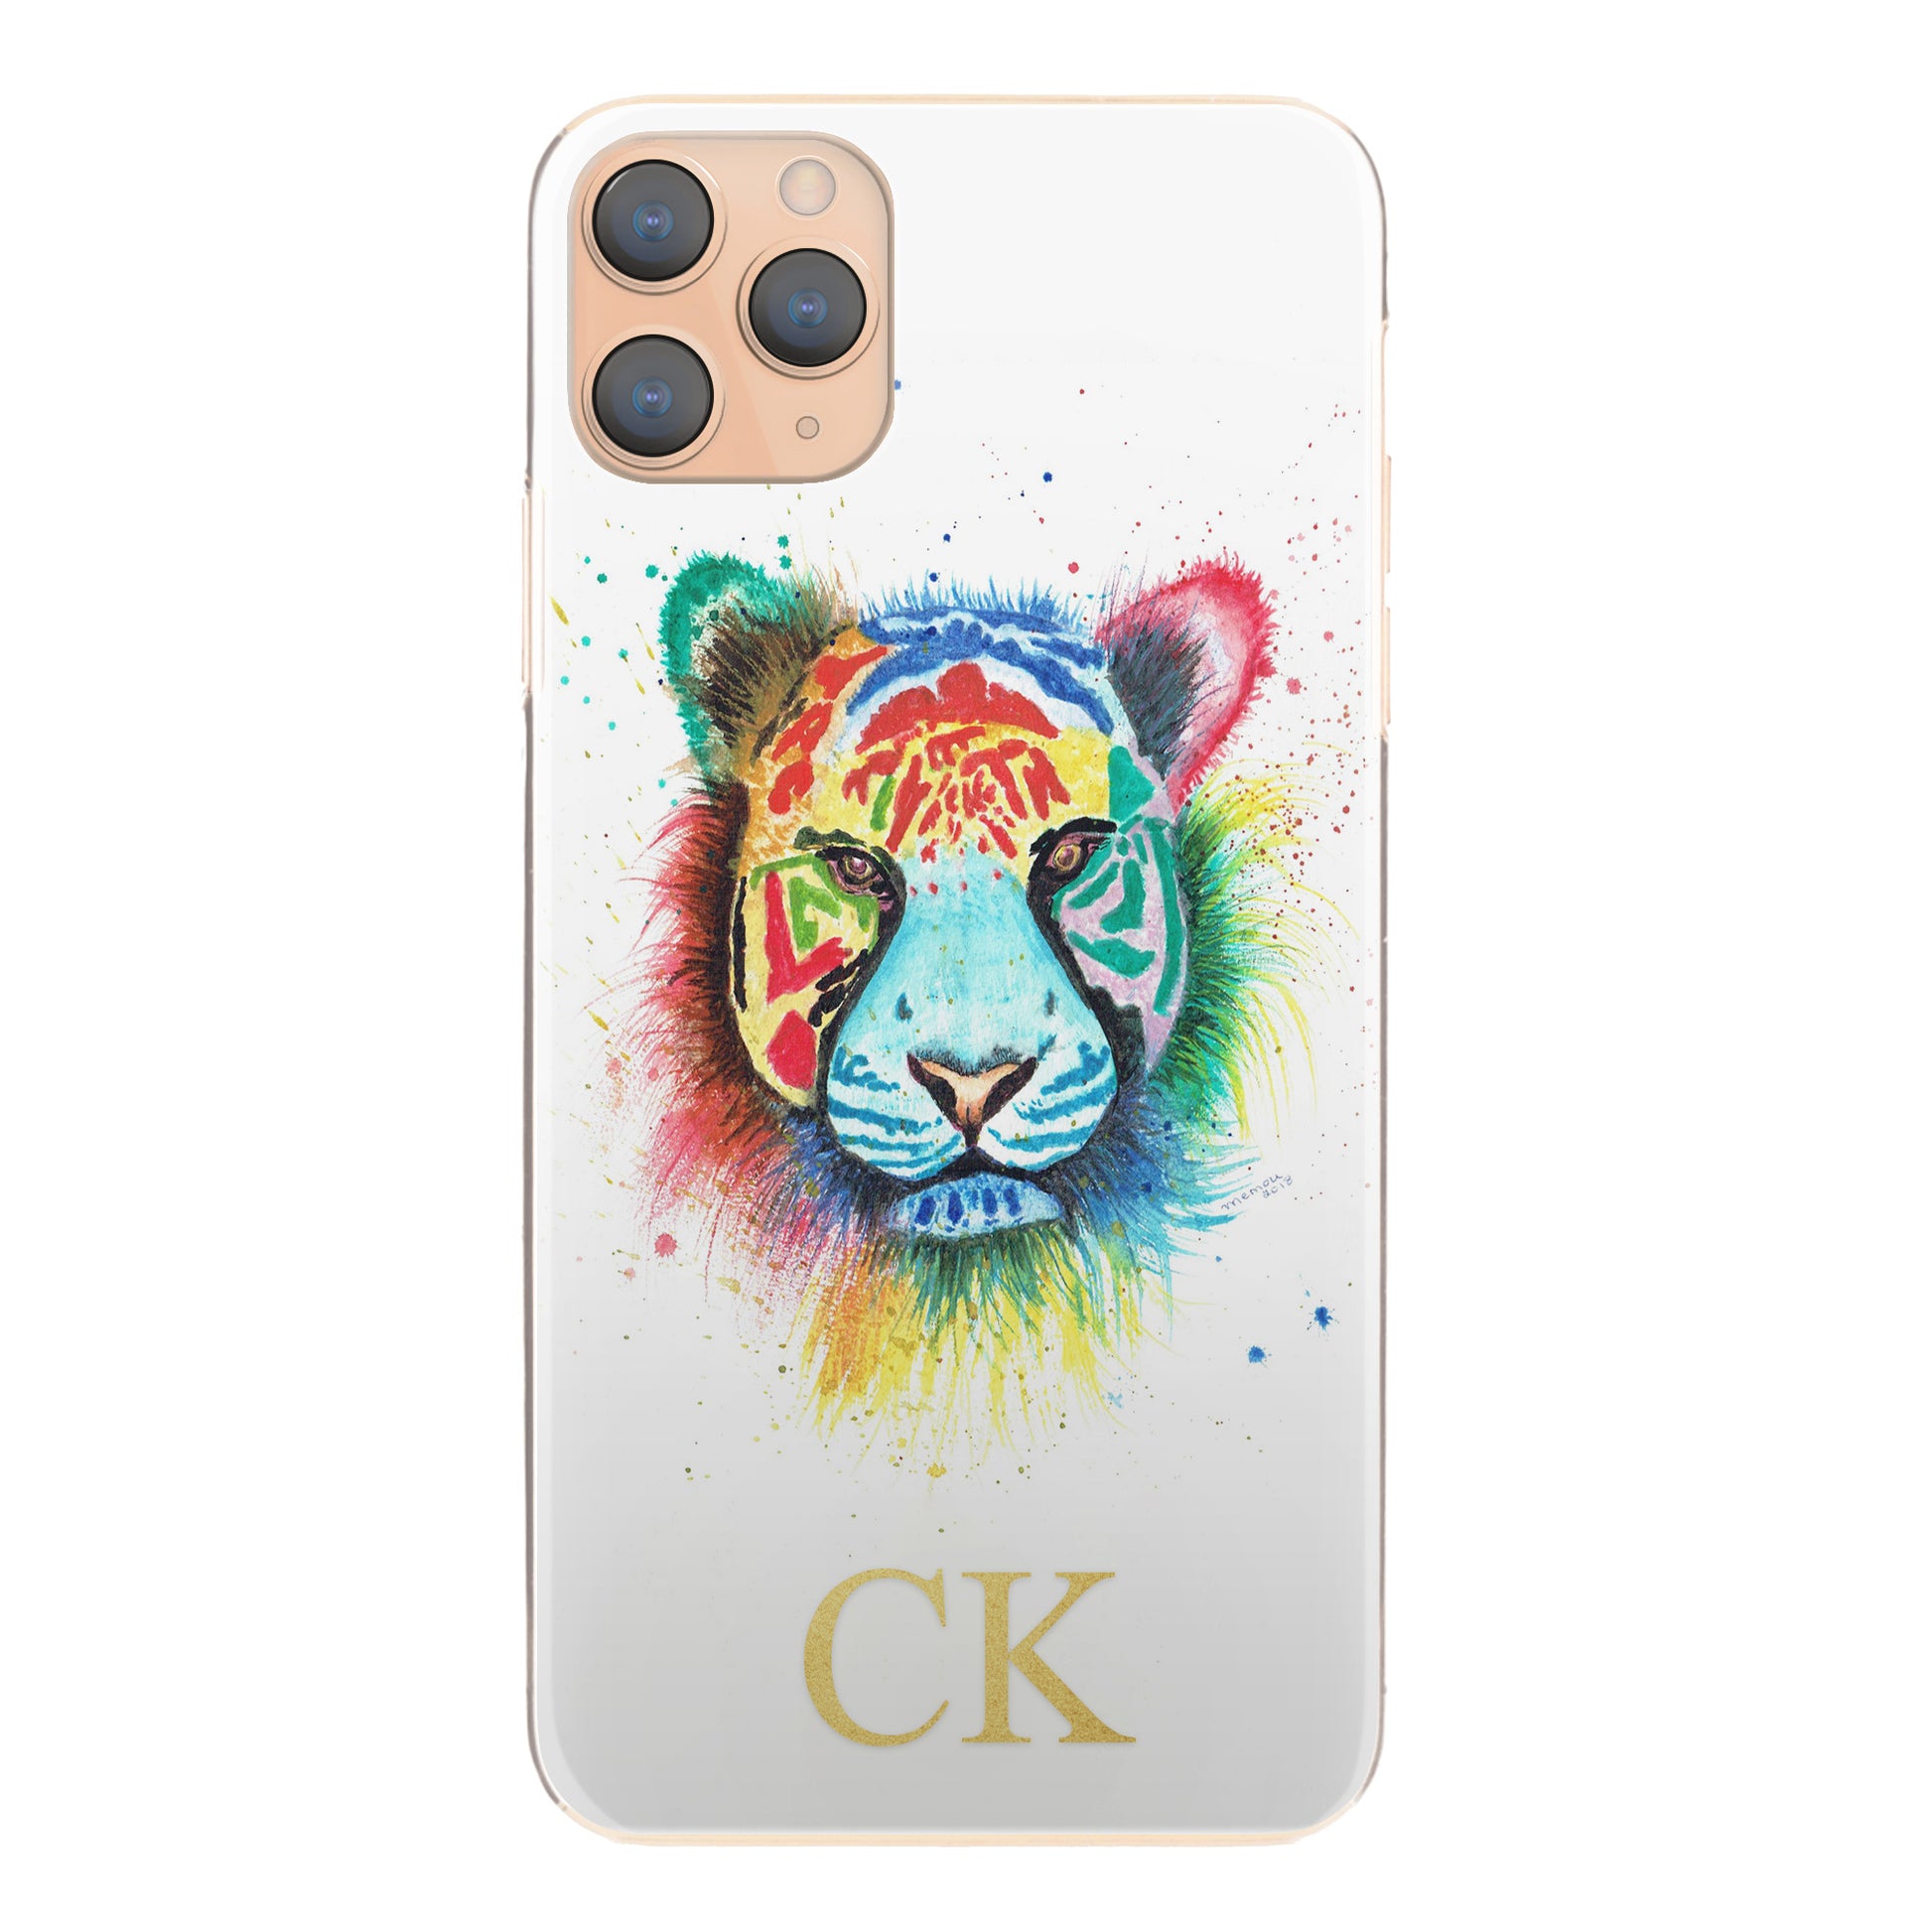 Personalised Oppo Phone Hard Case with Rainbow Tiger and Gold Initials